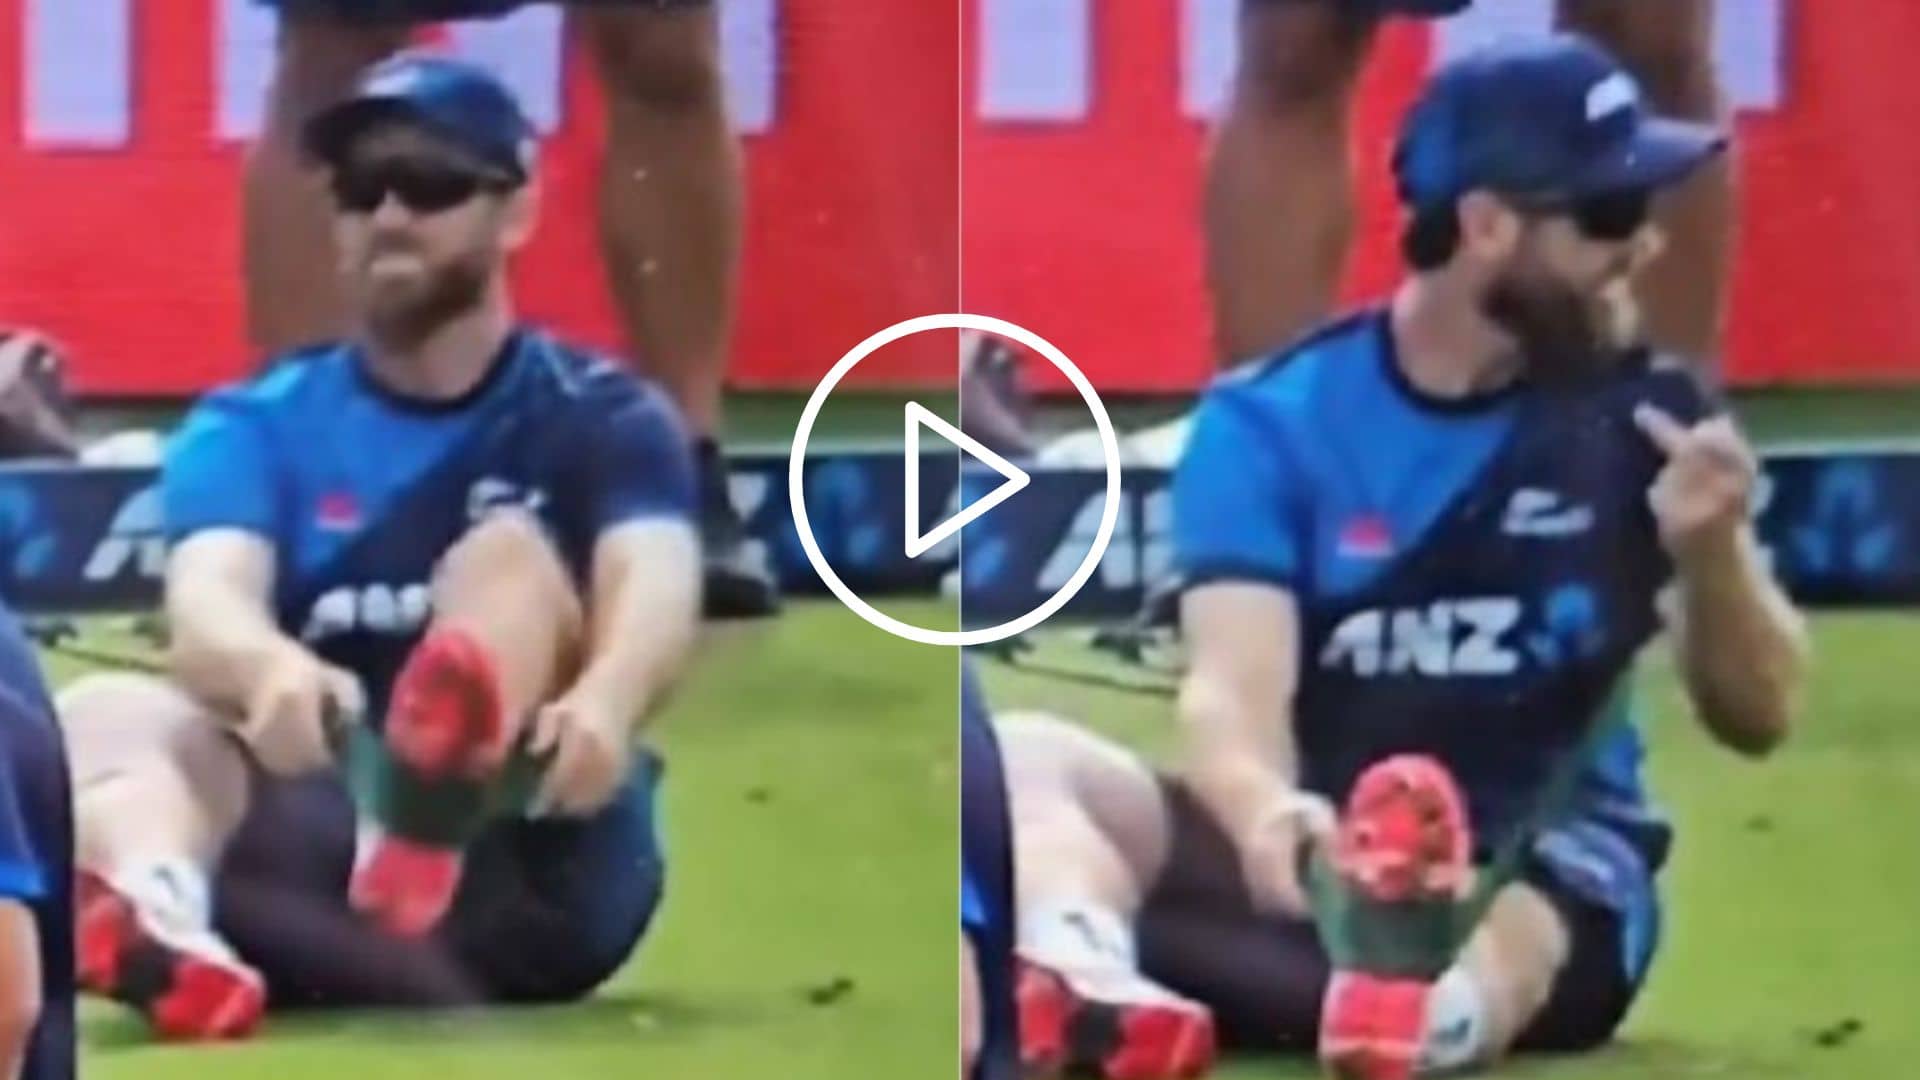 [Watch] Kane Williamson's Middle Finger Gesture After Being Hit By a Ball Goes Viral